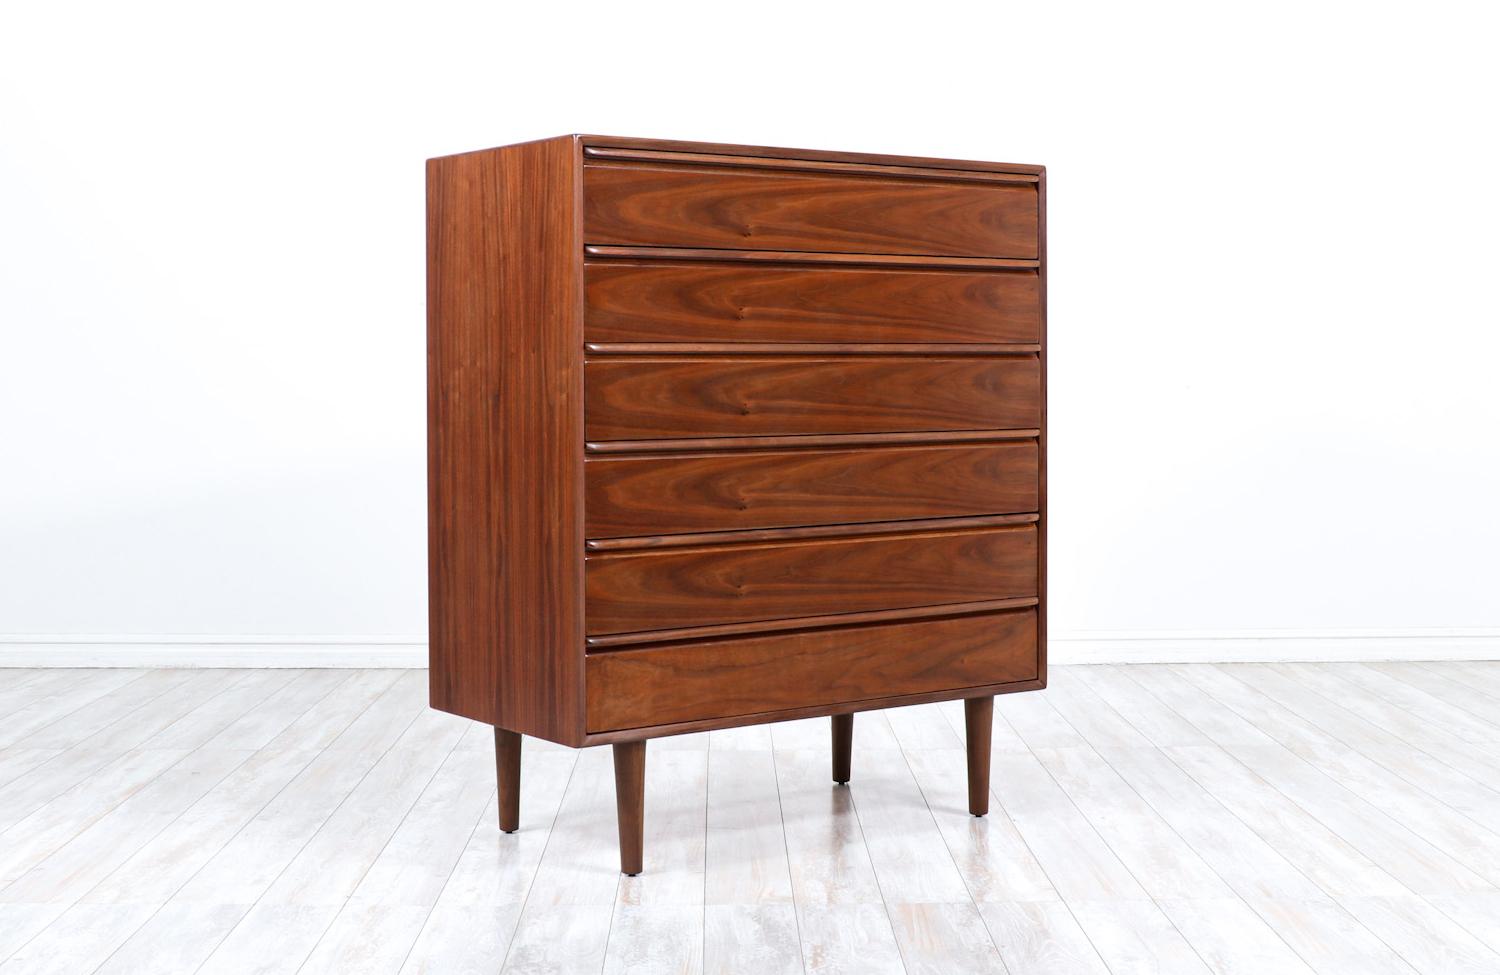 Mid-Century Modern walnut chest of drawers by Westnofa.

________________________________________

Transforming a piece of Mid-Century Modern furniture is like bringing history back to life, and we take this journey with passion and precision. With